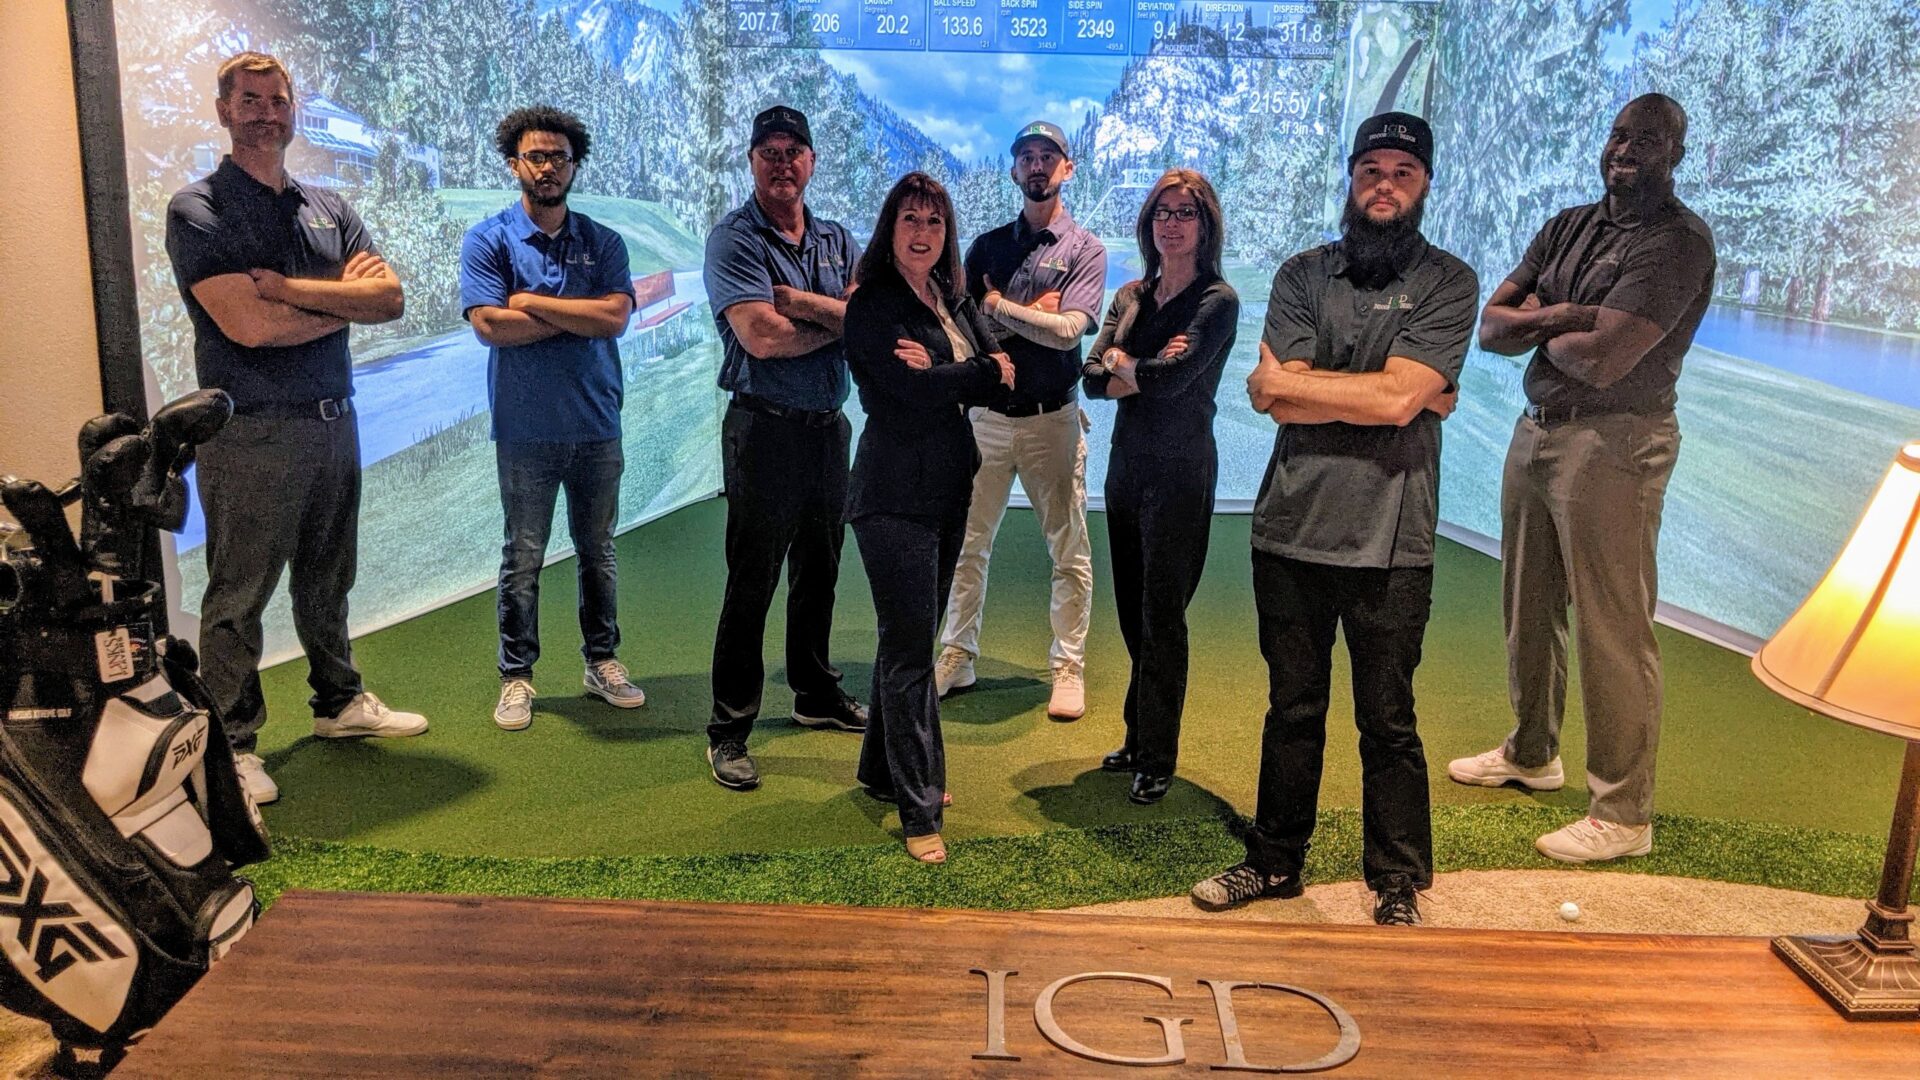 igd team picture